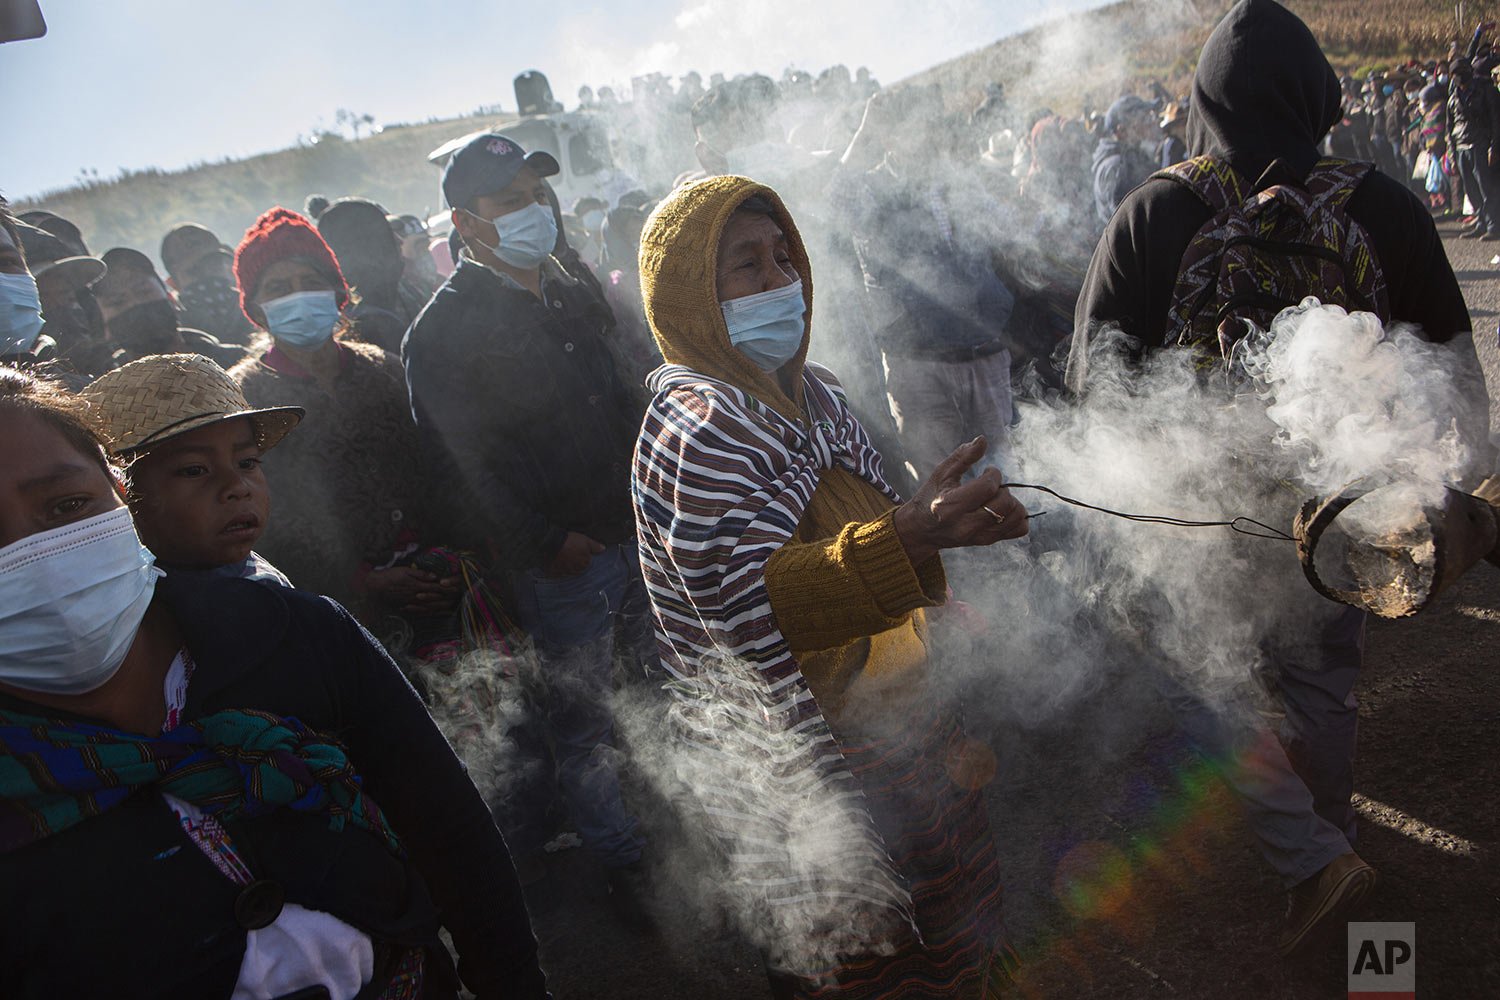  A woman spreads incense as coffins are brought to a protest against violence in Santa Catarina Ixtahuacan, Guatemala, Dec. 20, 2021. A dozen people were slain in Chiquix, a village that has been involved in a years-long territorial dispute with Sant